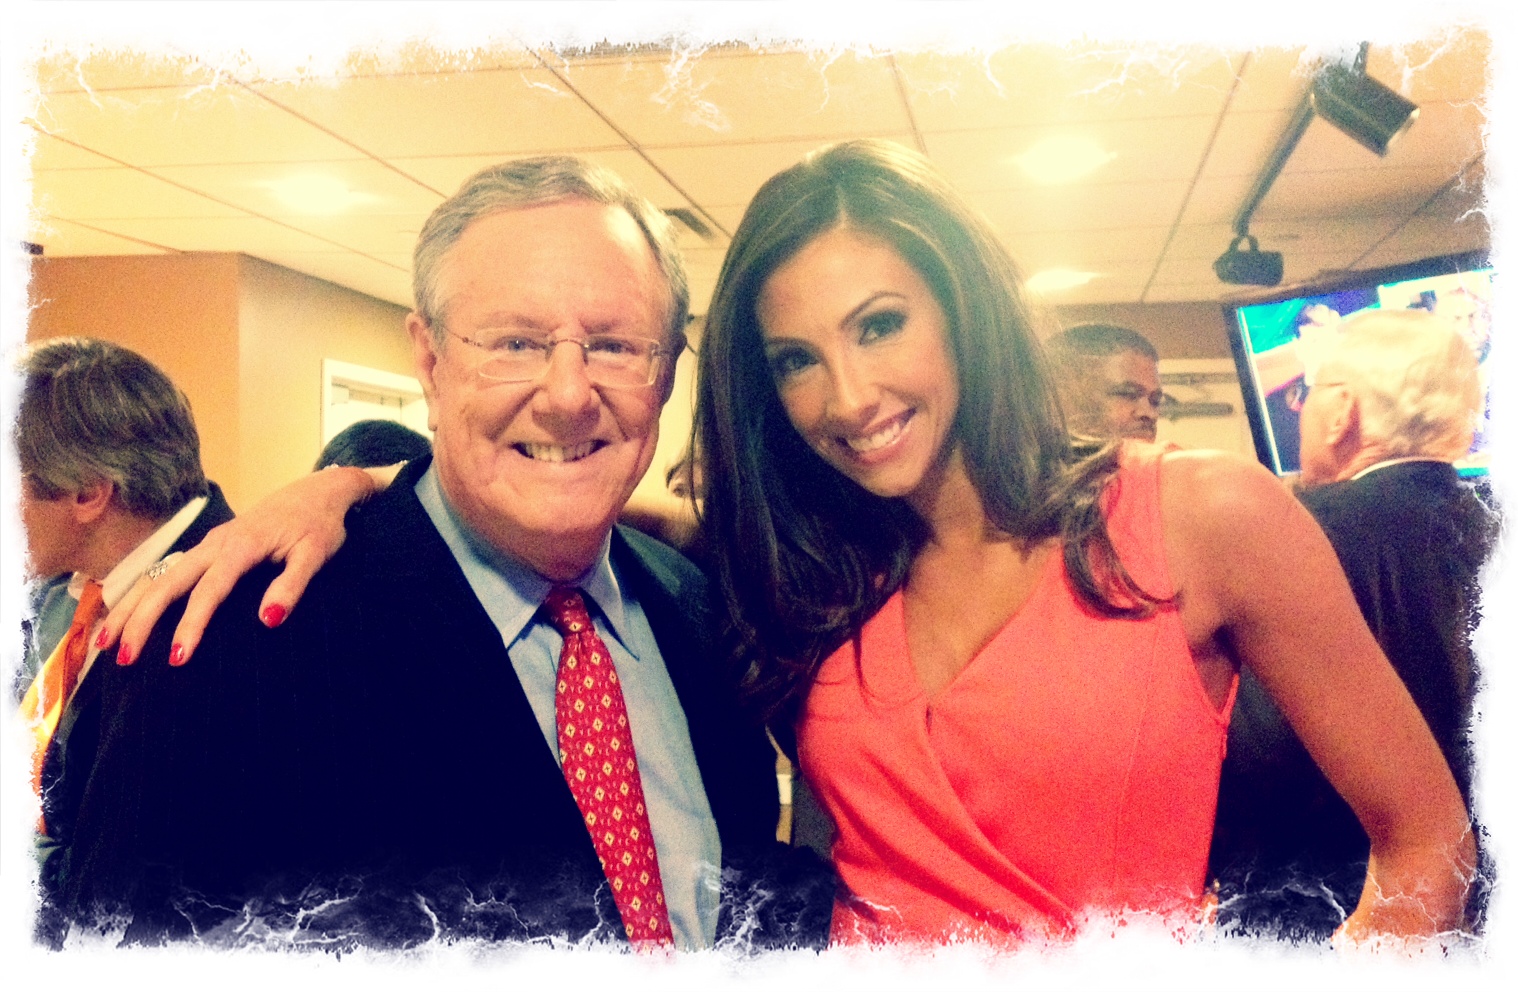 Katrina Campins and Steve Forbes on The Hannity Show One Hour Special discussing The Economy. Fox News.